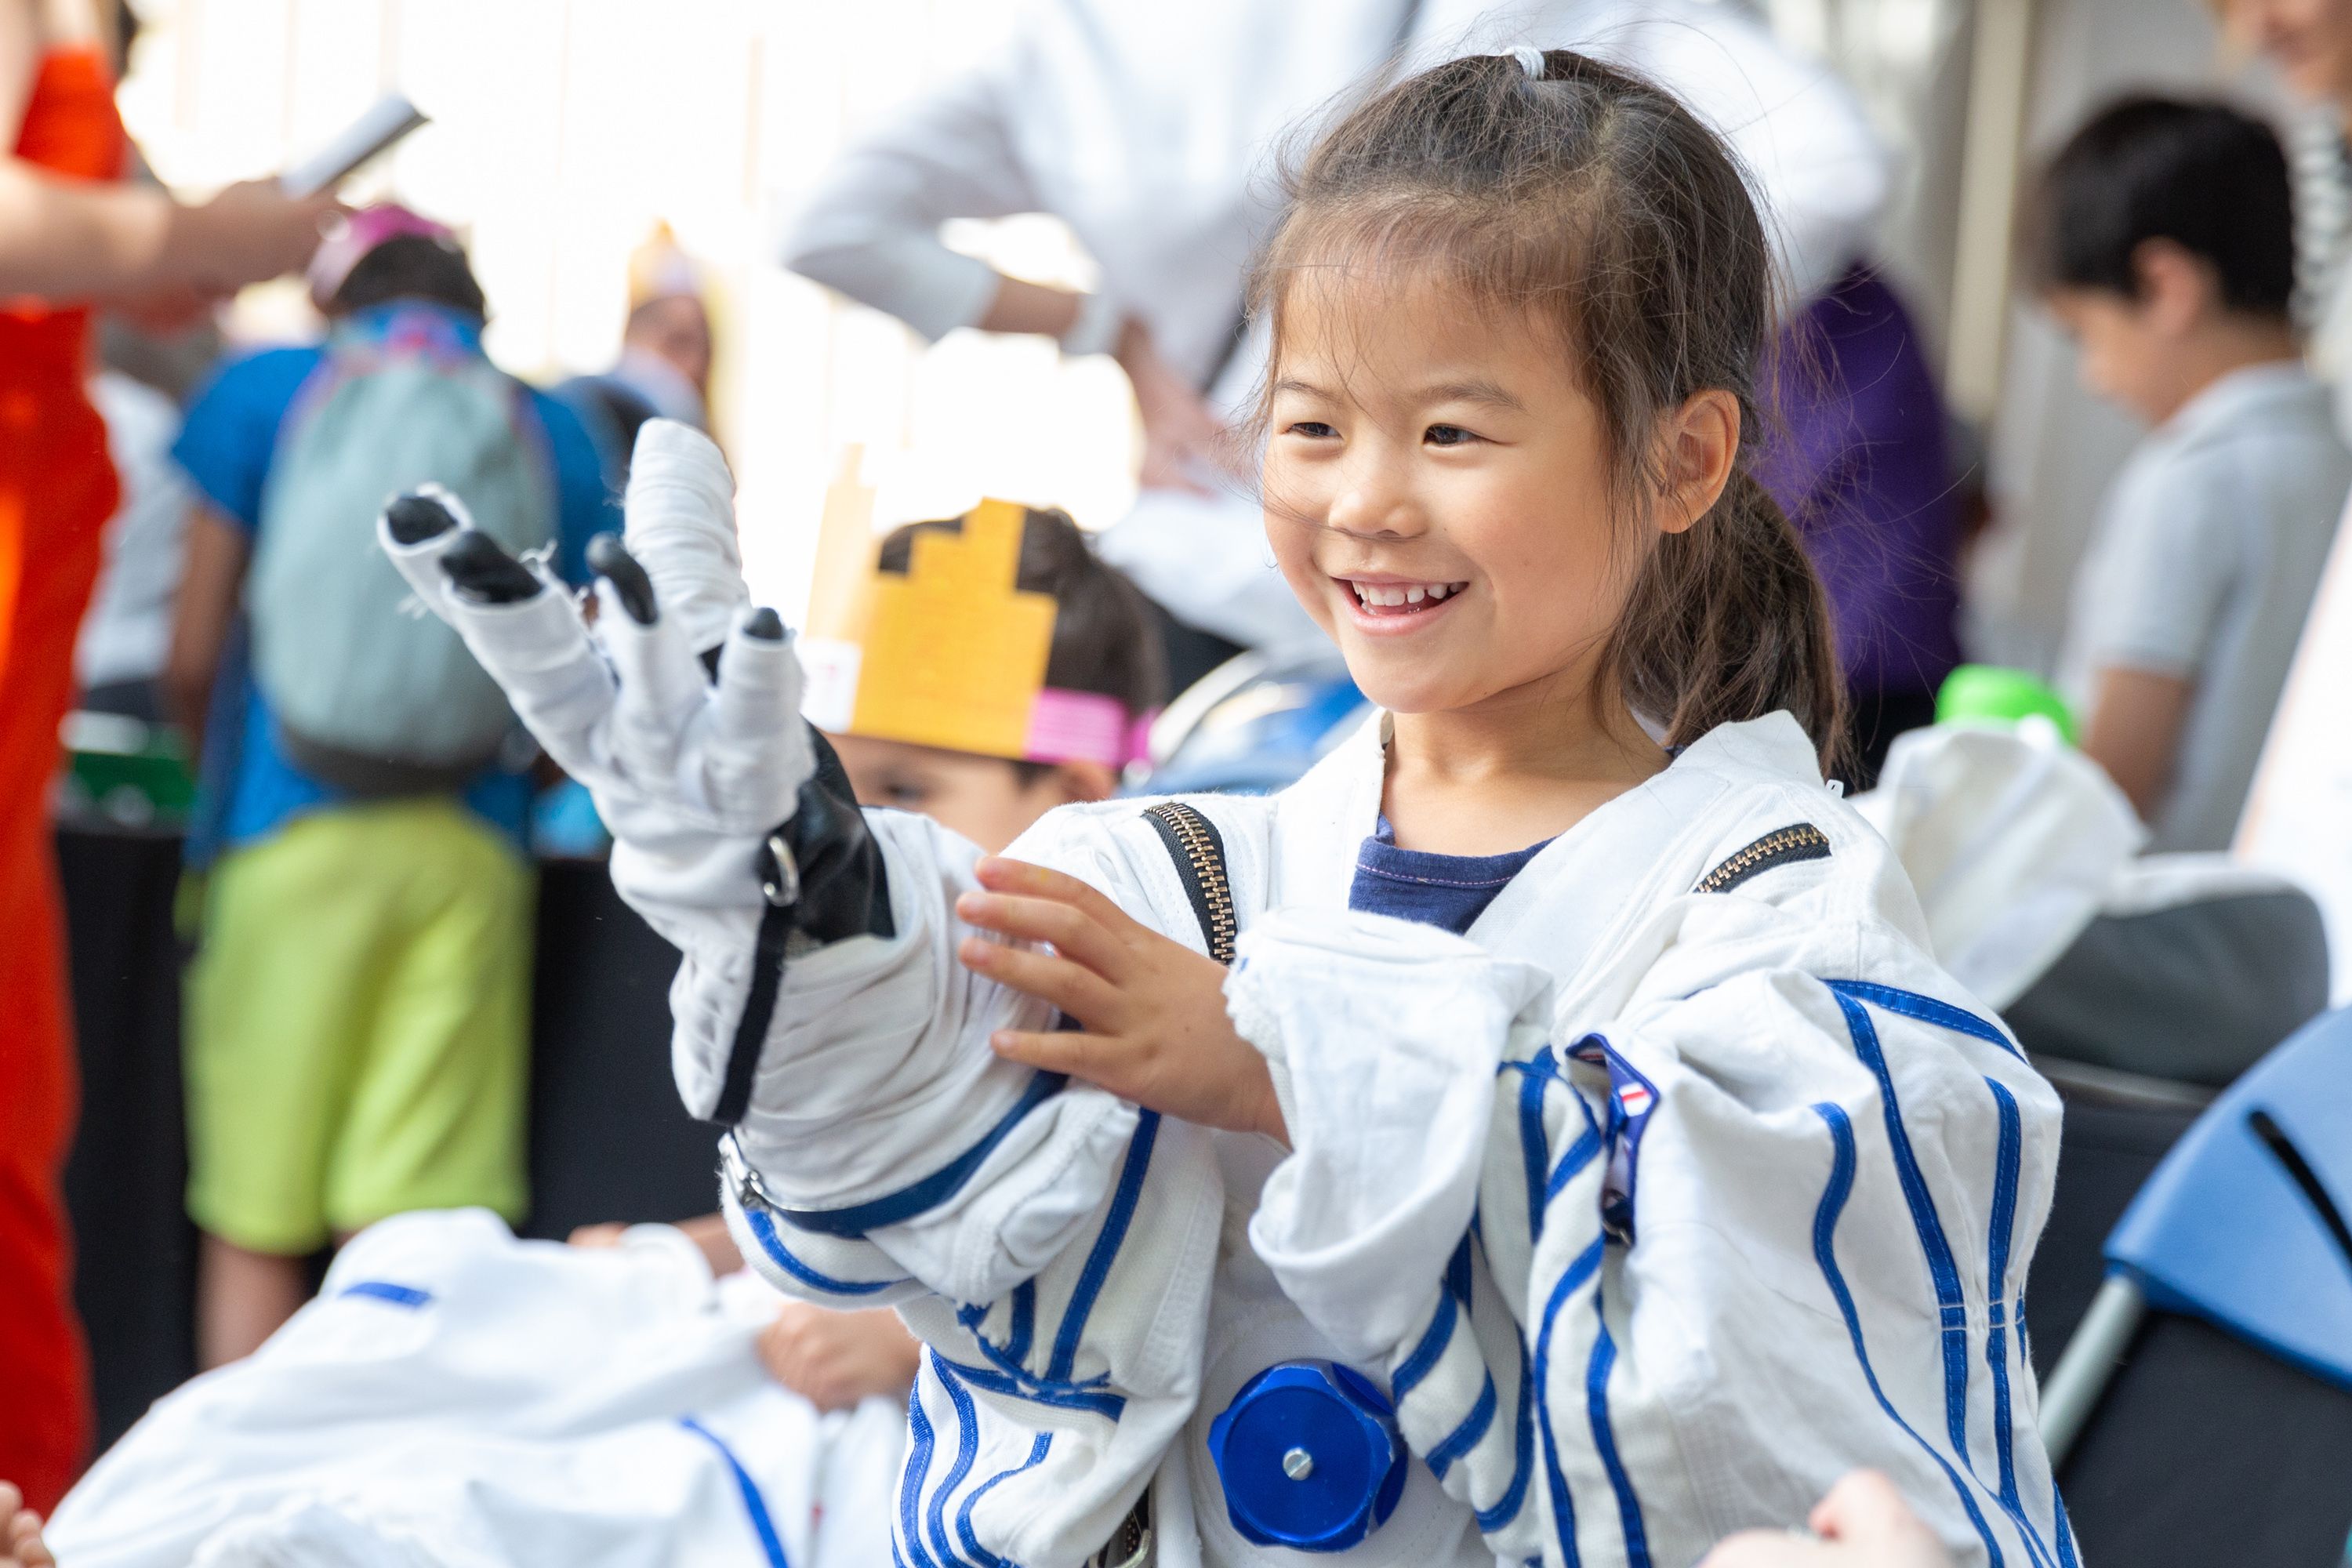 A young girl smiling as she tries on a space suit